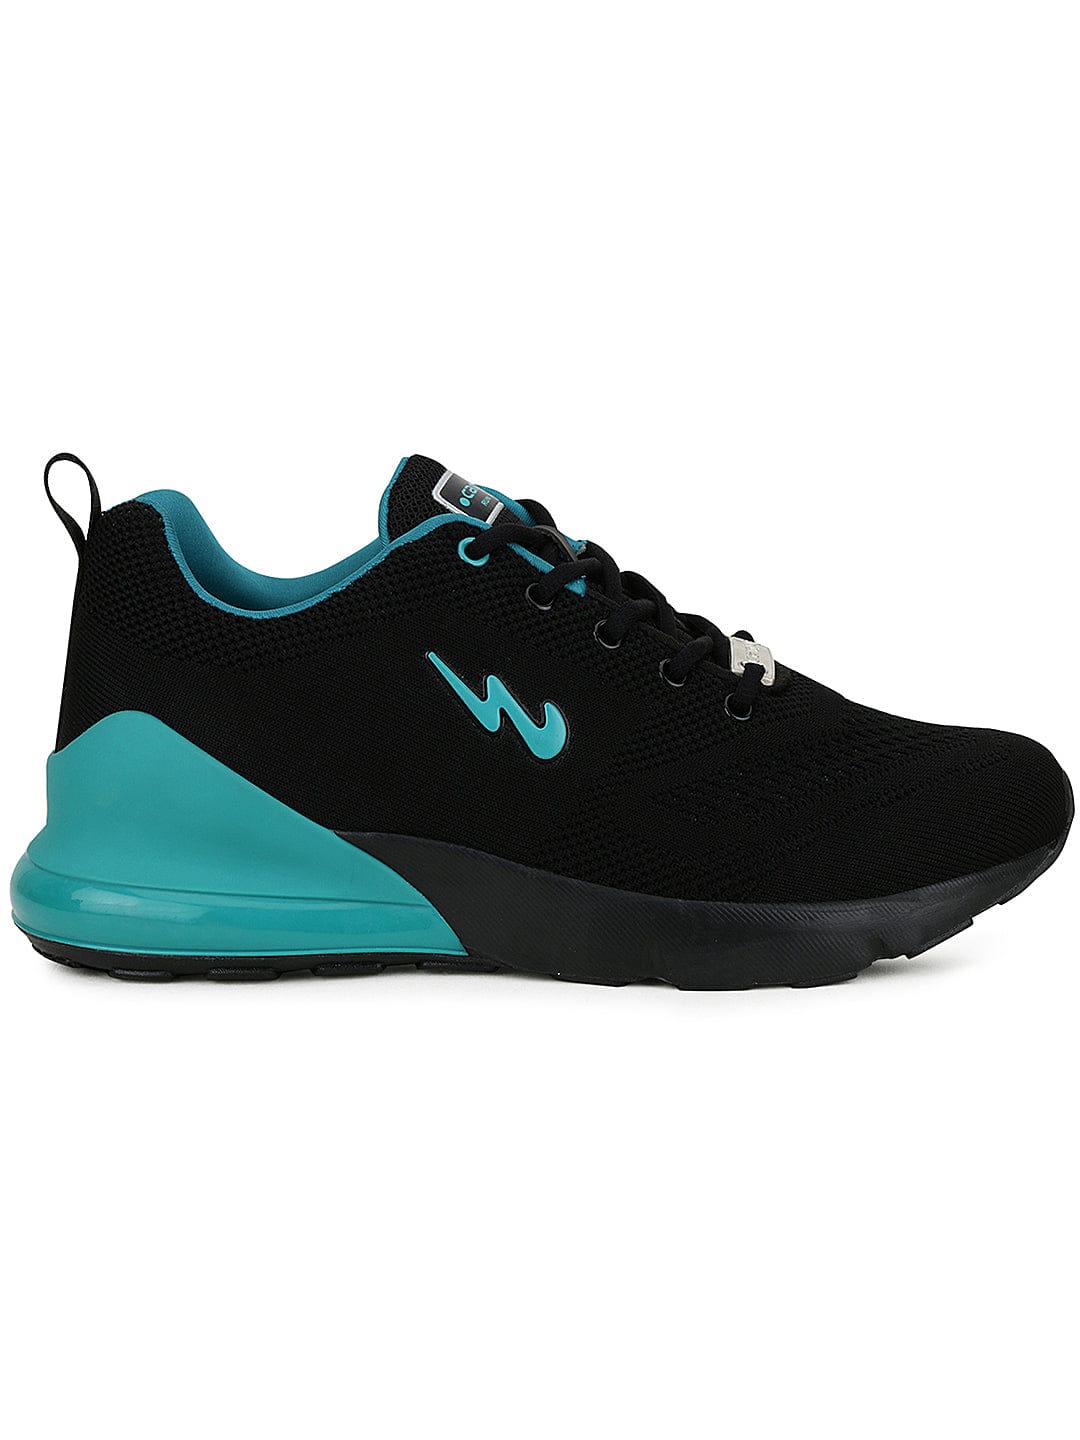 Buy Running Shoes For Men: Flying-Fury-Blk-T-Blu | Campus Shoes